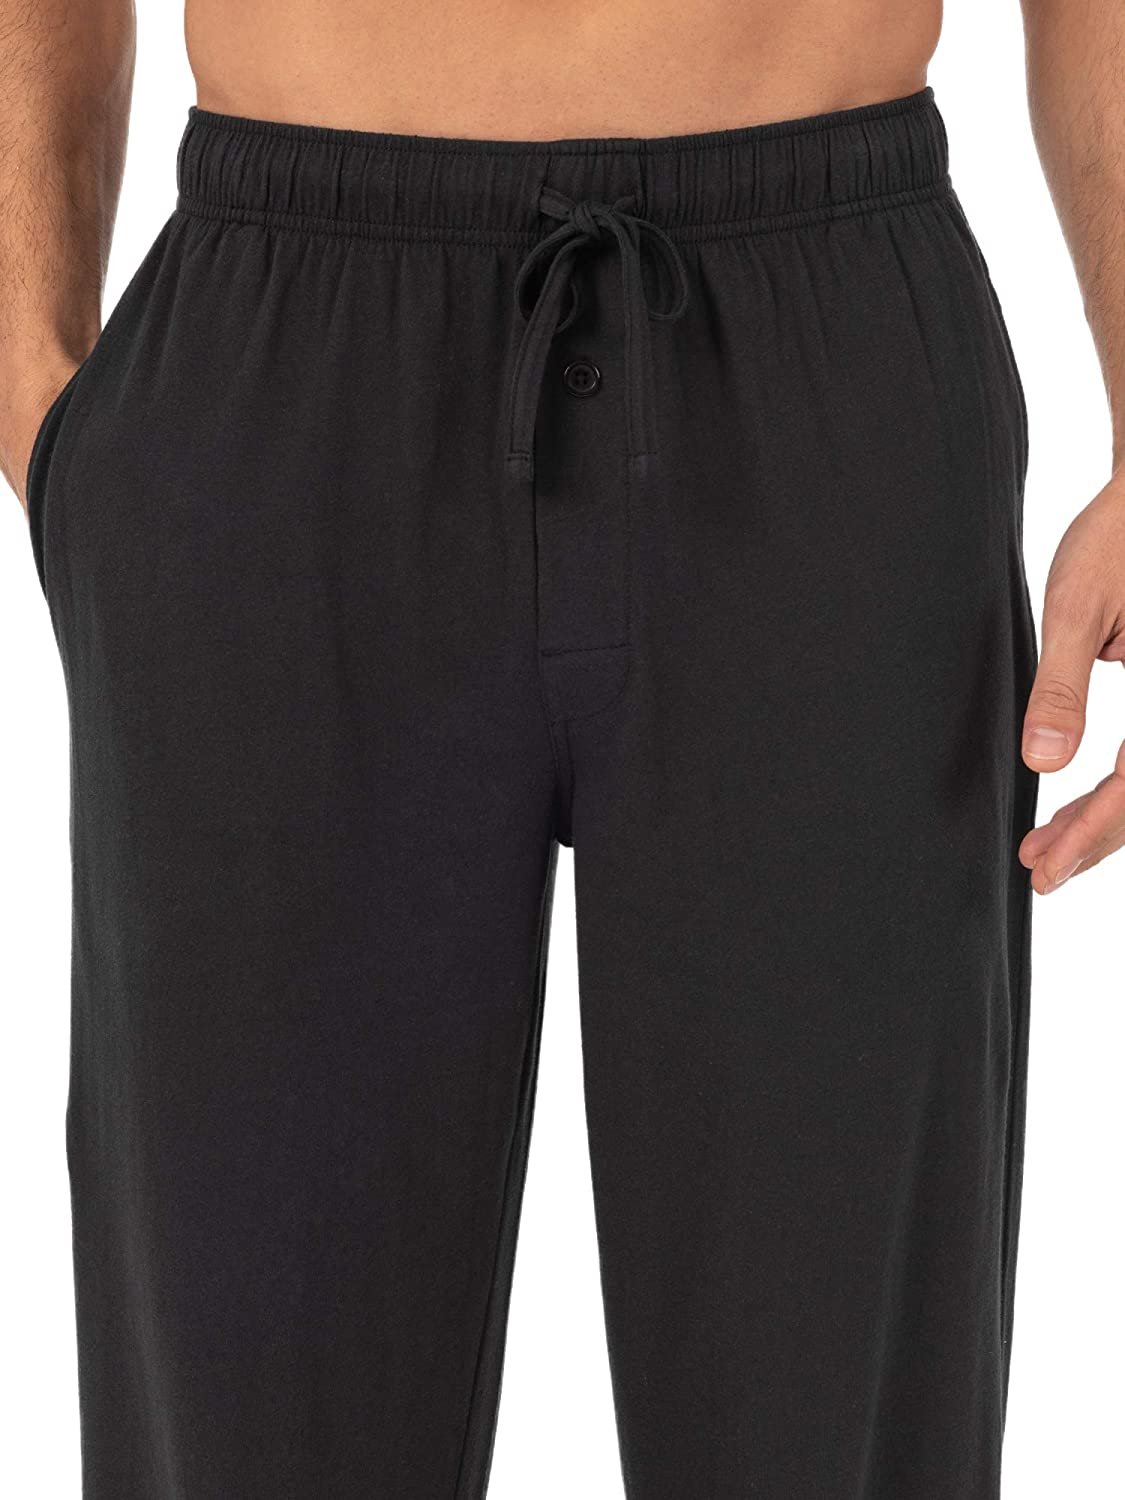 Fruit of the Loom Men's and Big Men's Jersey Knit Pajama Pants, Sizes S-6XL - image 5 of 7